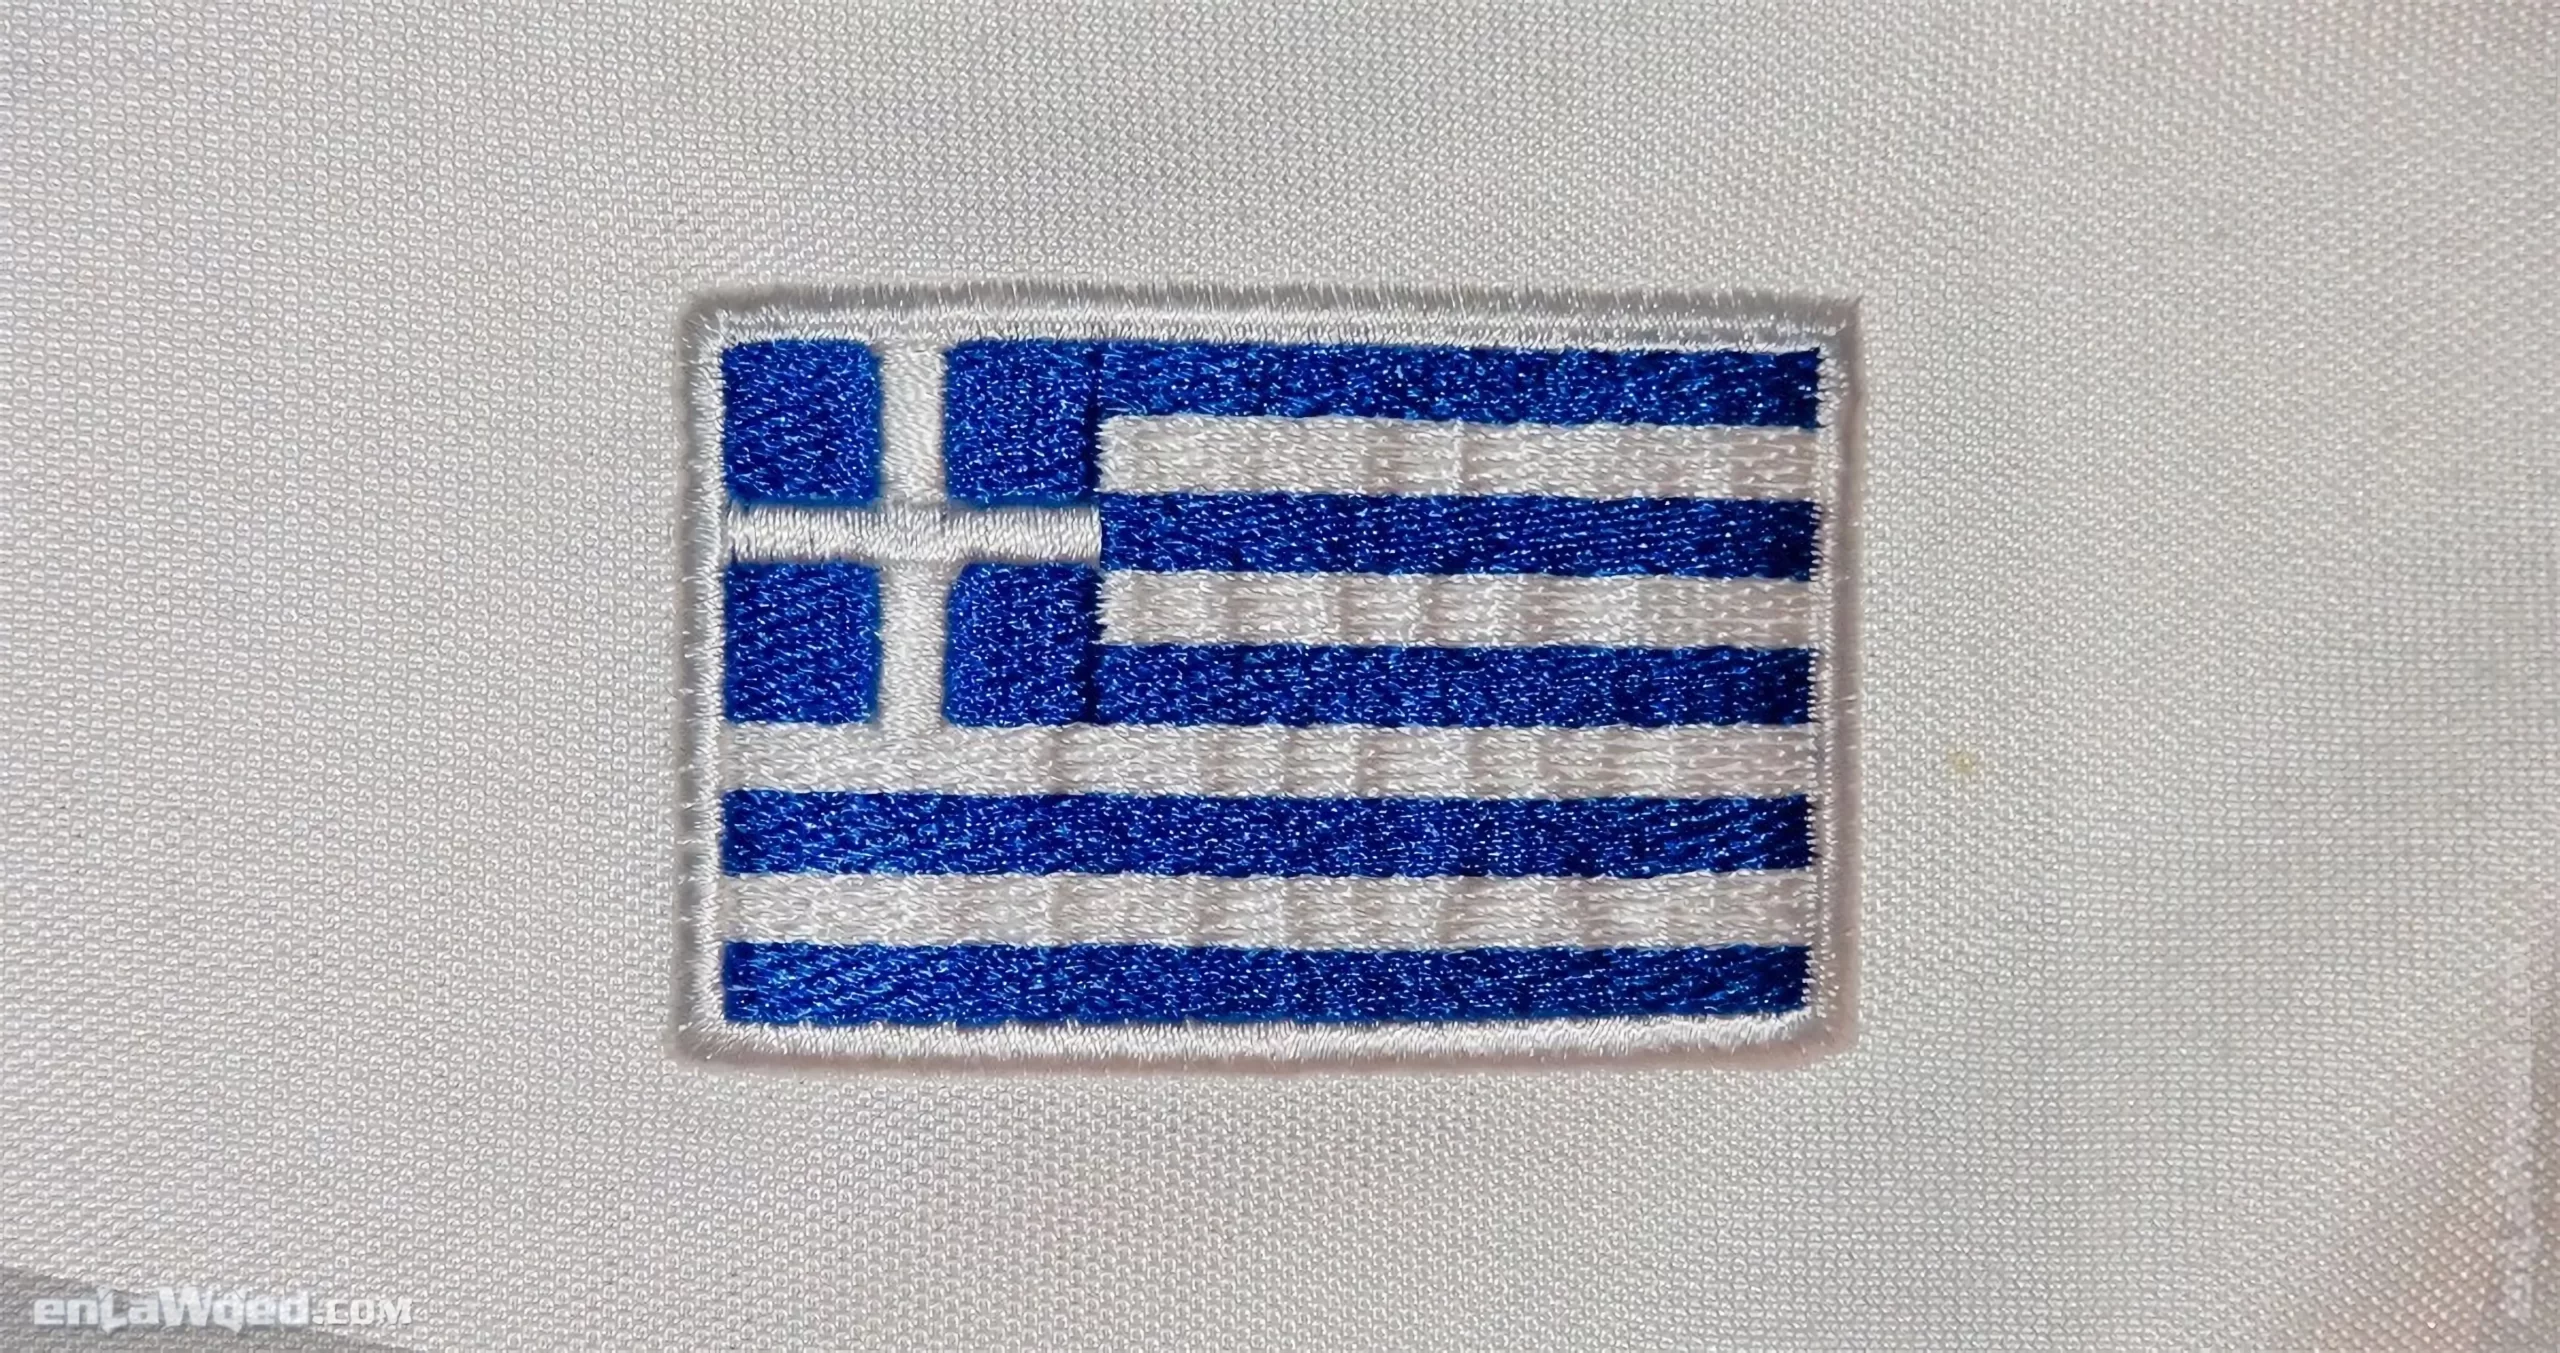 Men’s 2003 Greece Track Top by Adidas: Natural (EnLawded.com file #lmch4pdk9cbwchkhxr5)